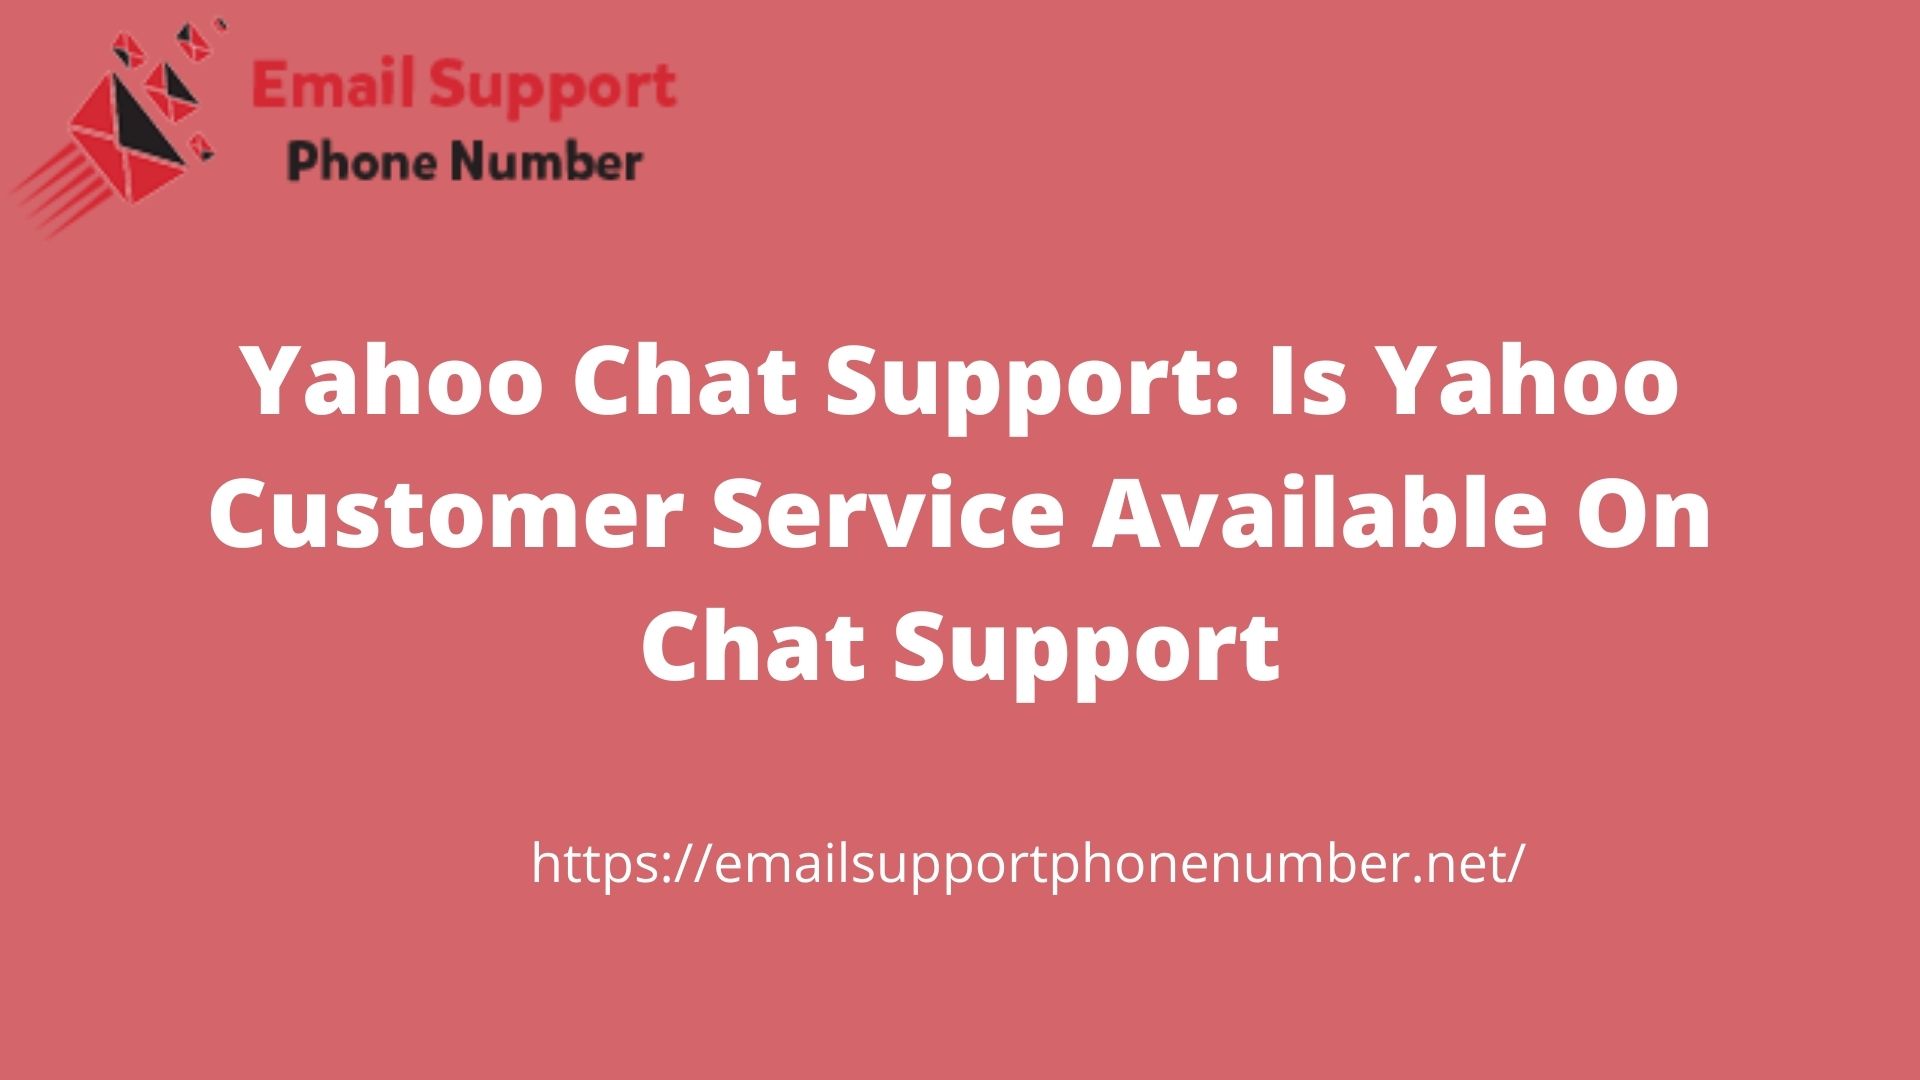 Yahoo Chat Support: Is Yahoo Customer Service Available On Chat Support?